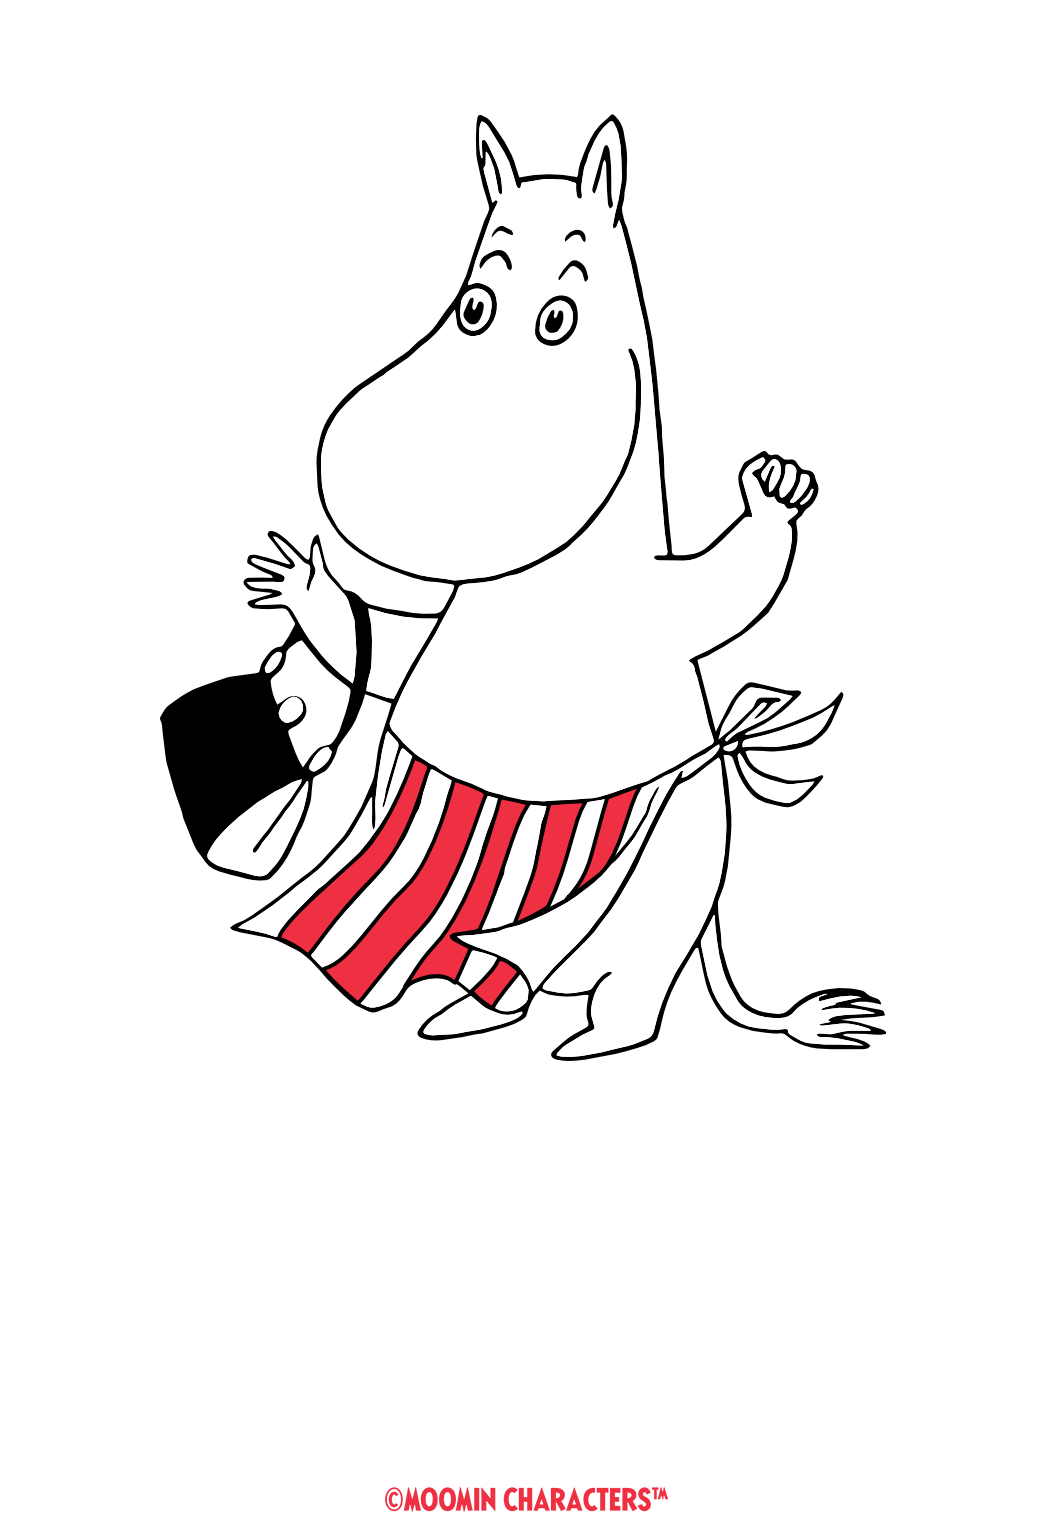 How About Some Moomin Wallpapers Featuring Moomijis Moomin